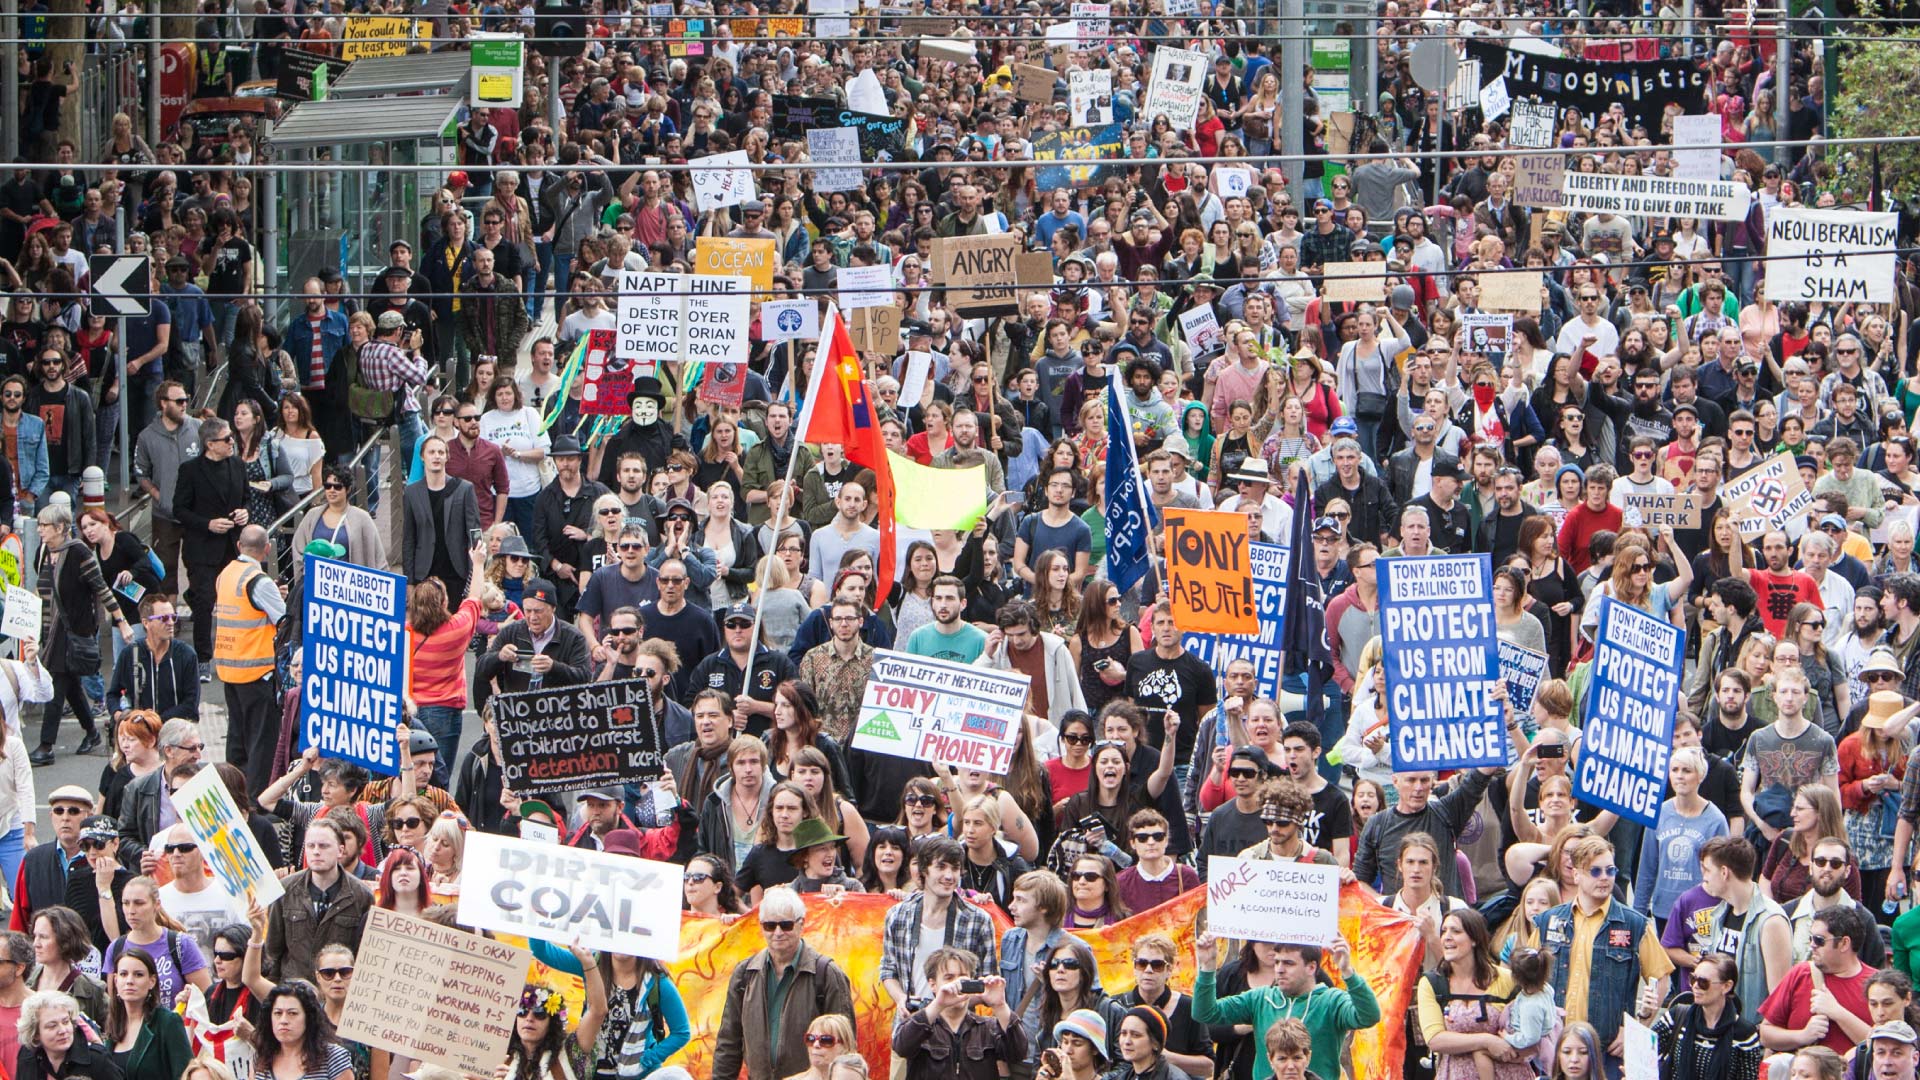 Crowd demonstrating in favor of climate action